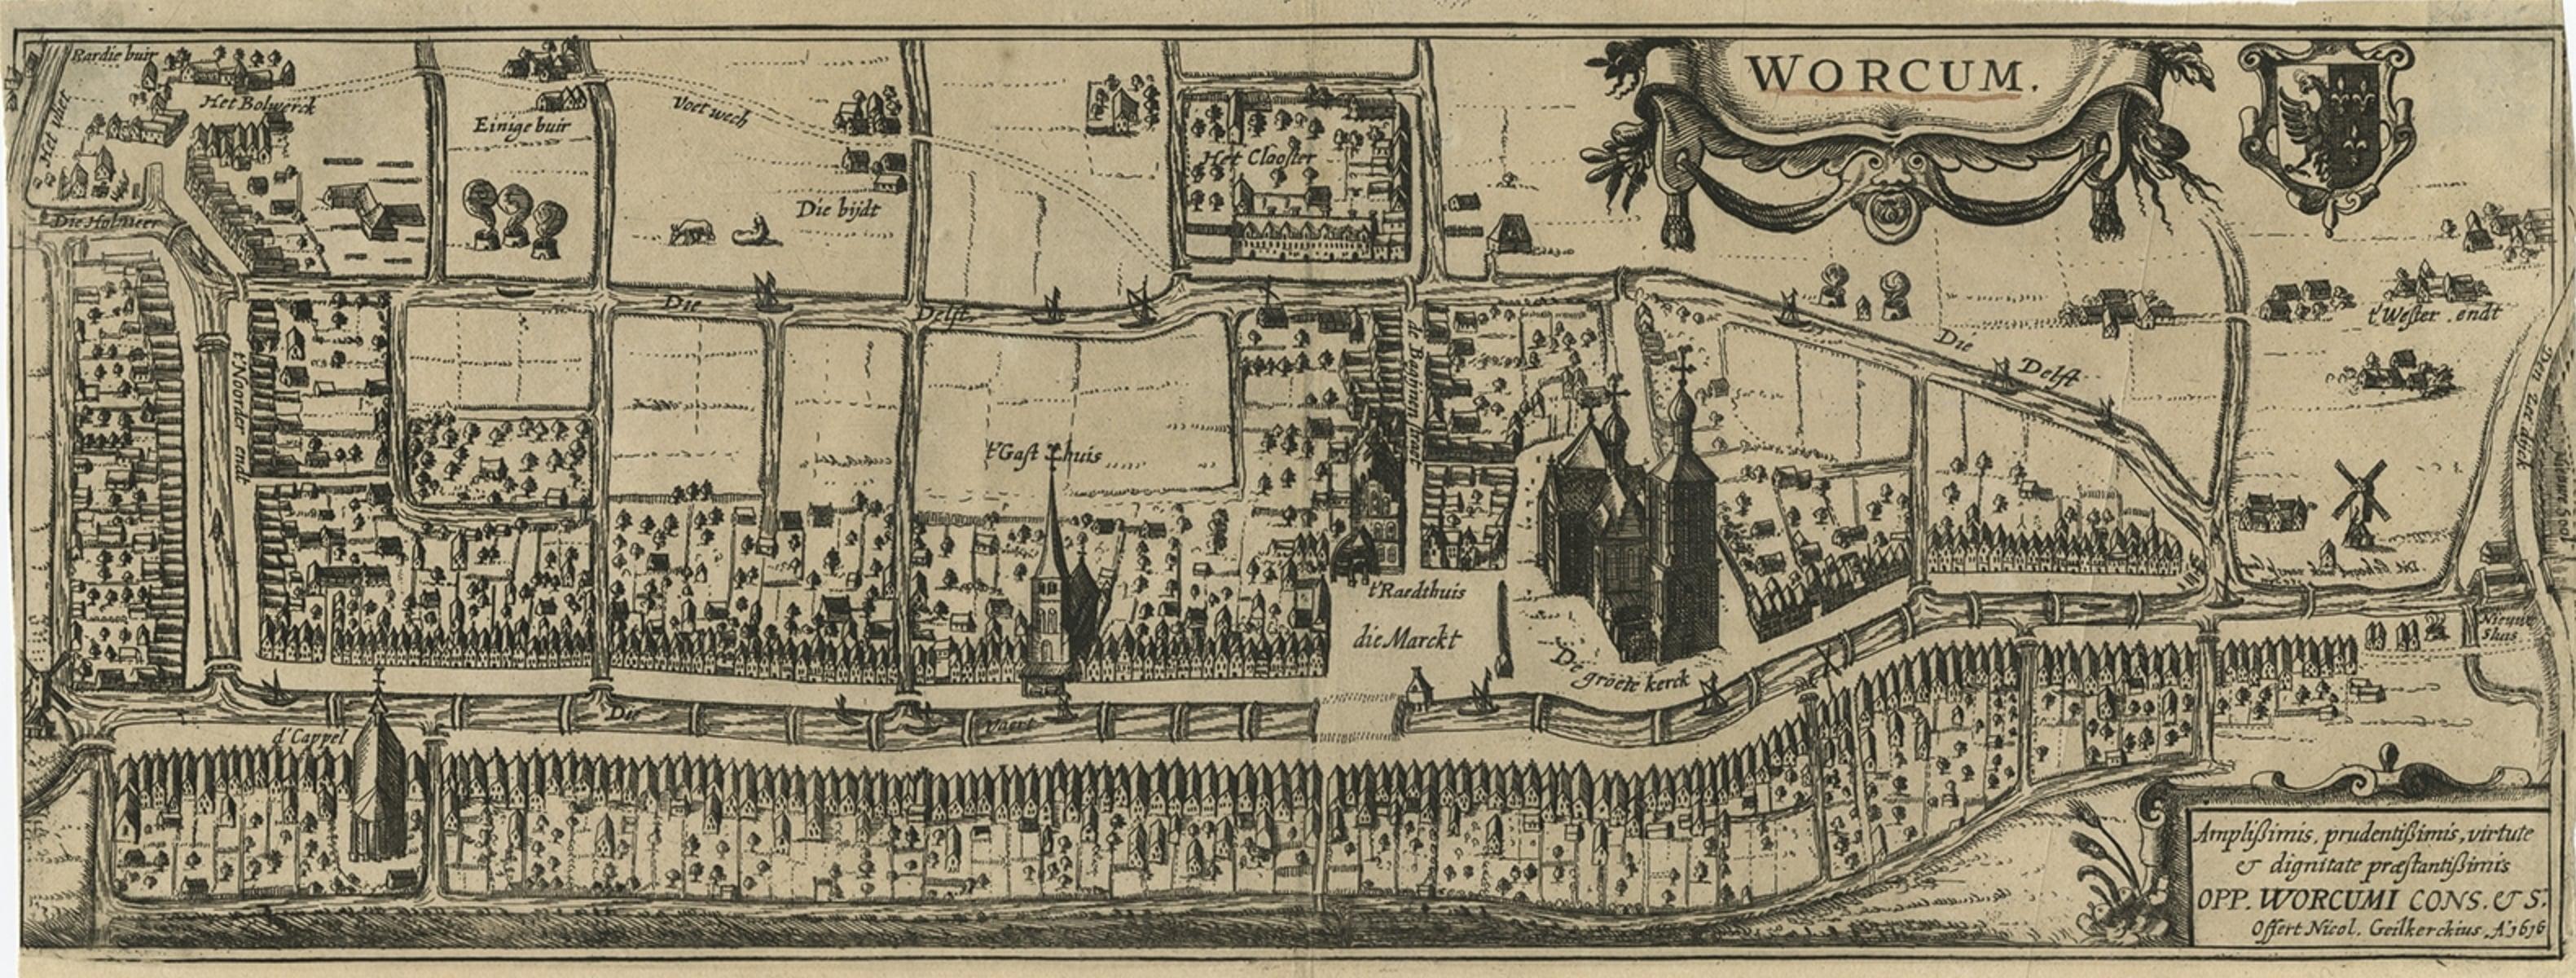 Antique map titled 'Worcum'. This print depicts the city of Workum (Friesland, The Netherlands). With German captions. This print originates from 'Rerum Frisicarum Historia' published by U. Emmius.

Artists and engravers: Nicolaes van Geelkercken